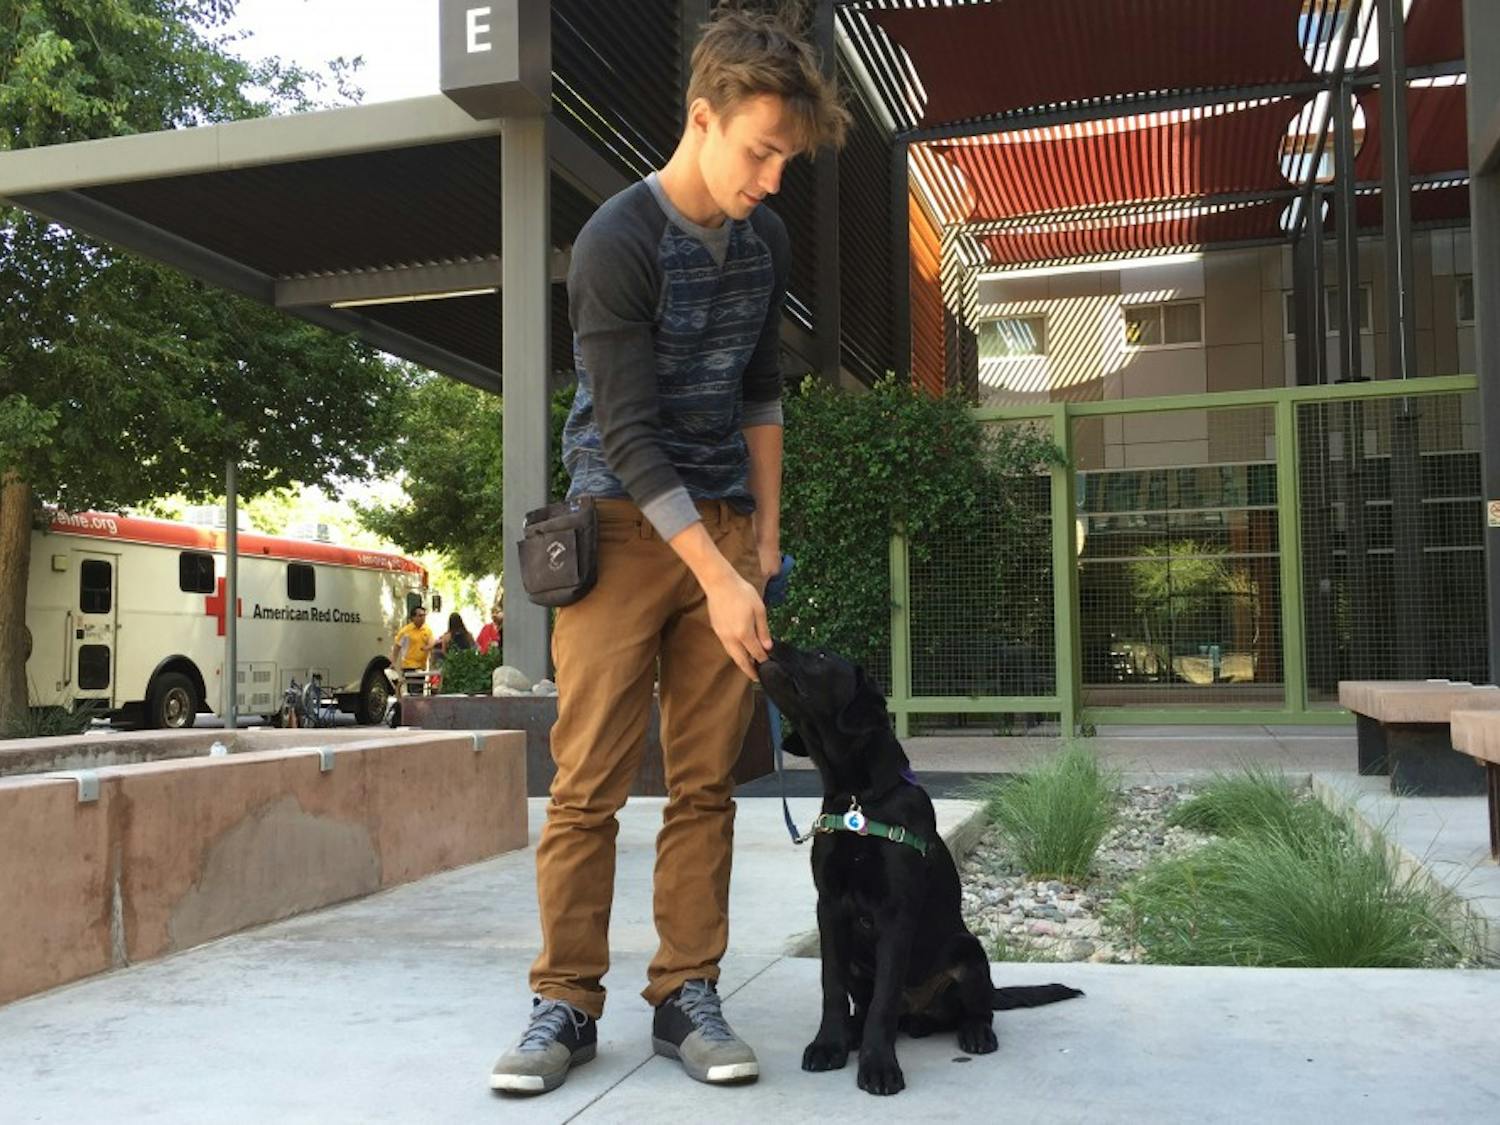 Patrick McCarthy works with service dog Gonzo.